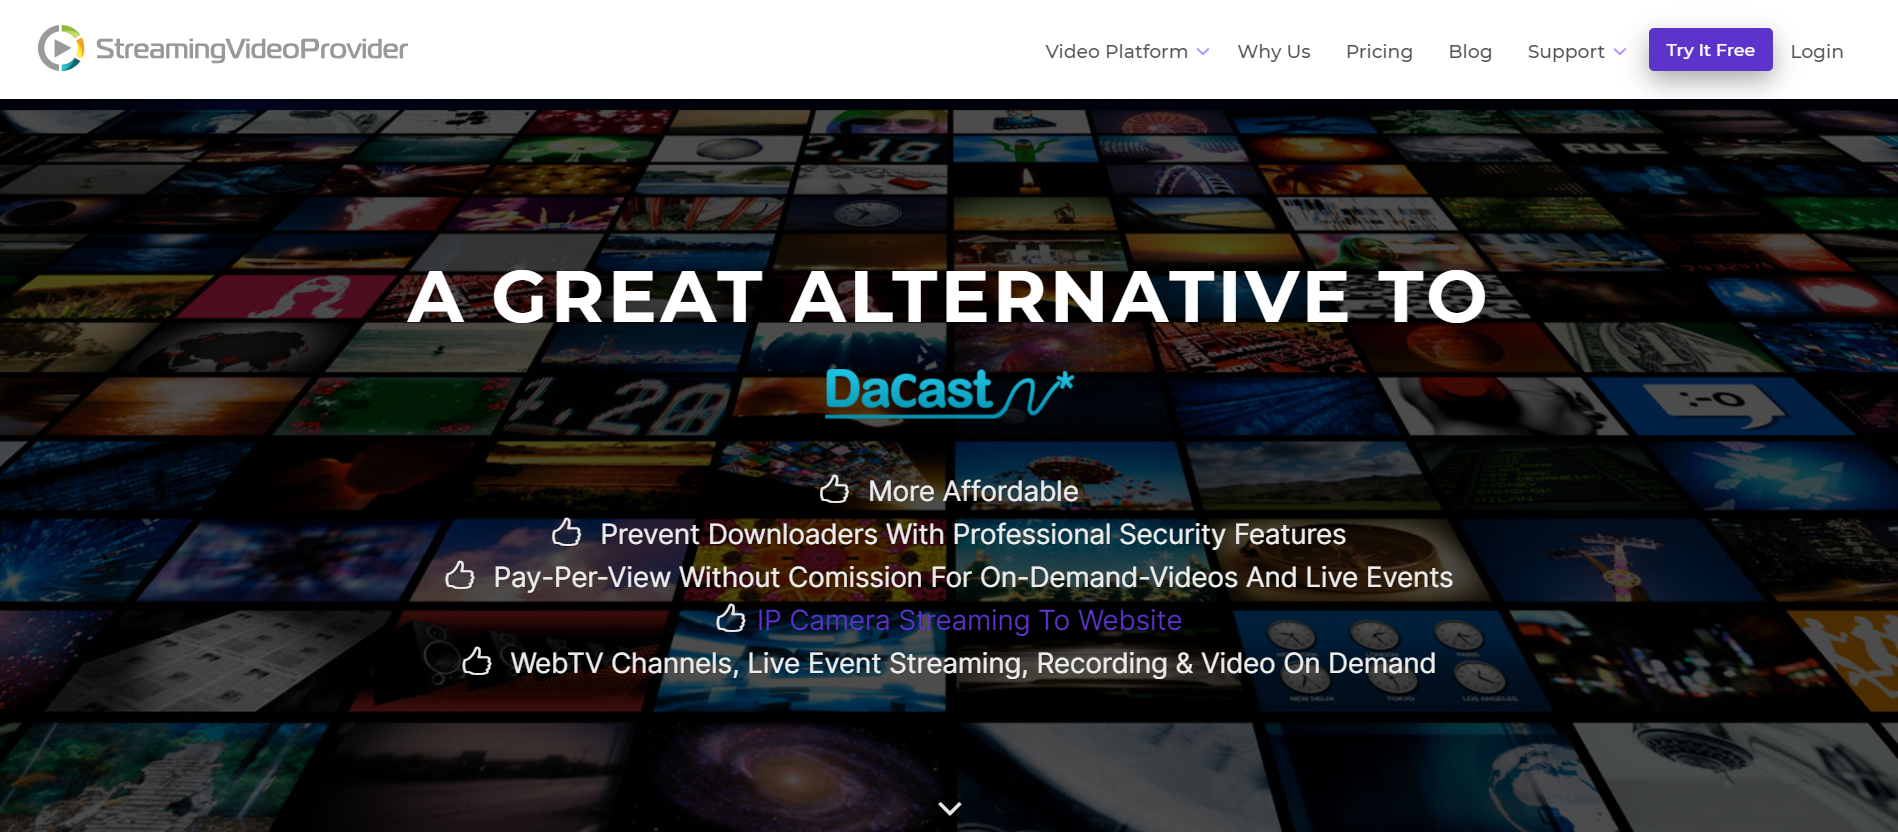 Vimeo Live Streaming Alternatives with Pay-Per-View